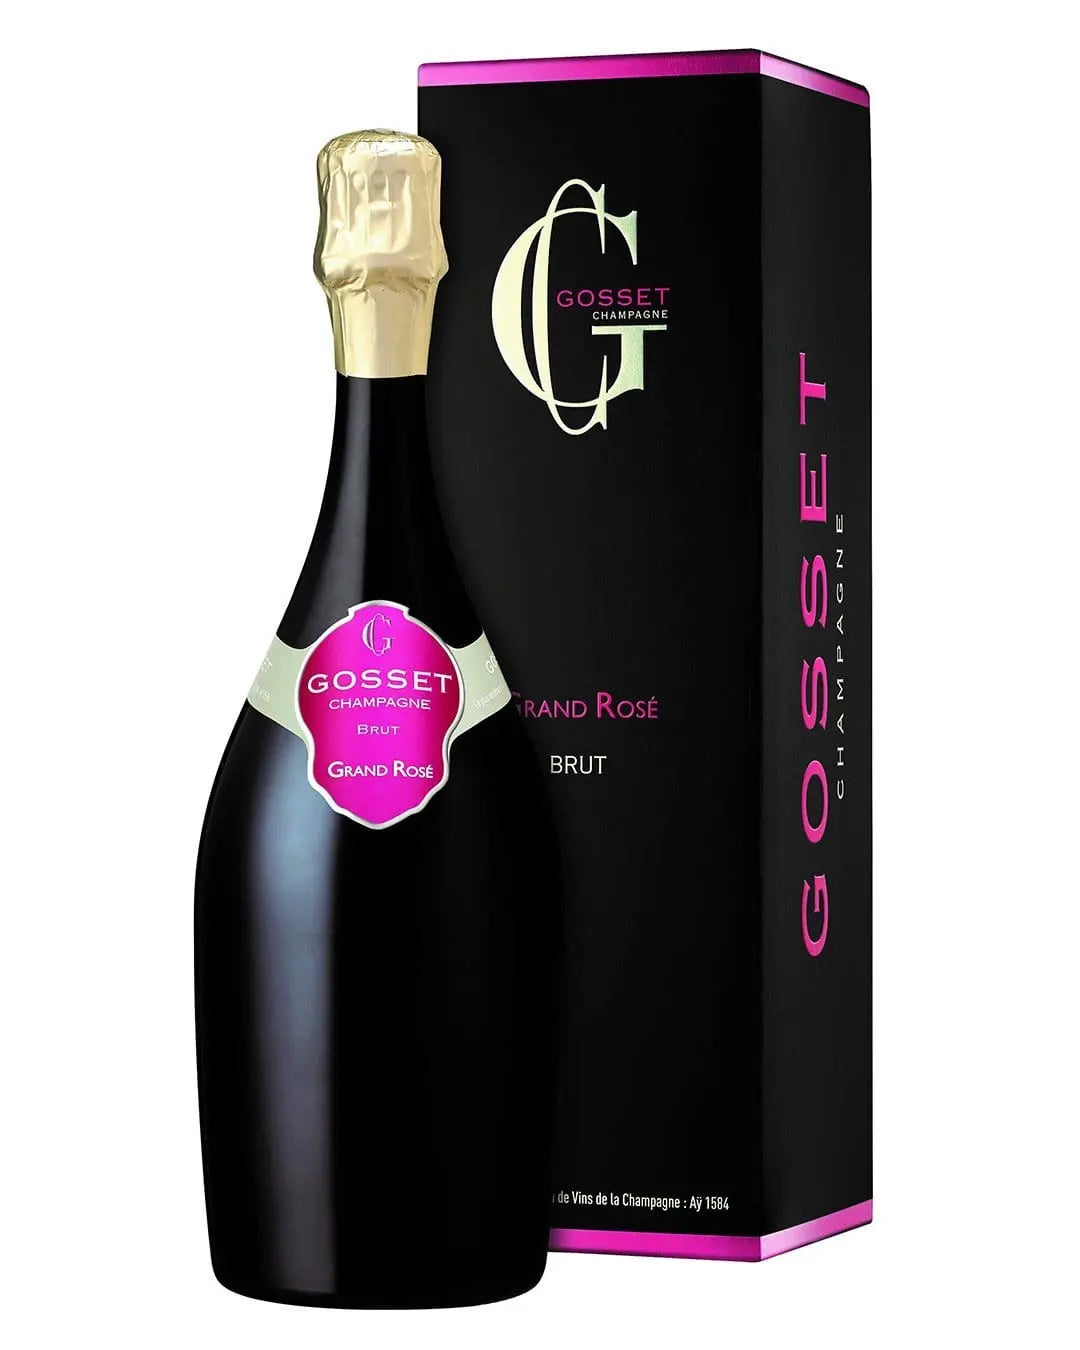 Mini Moet Rose Champagne 20cl Twin Postal Box, Buy online for UK  nationwide delivery